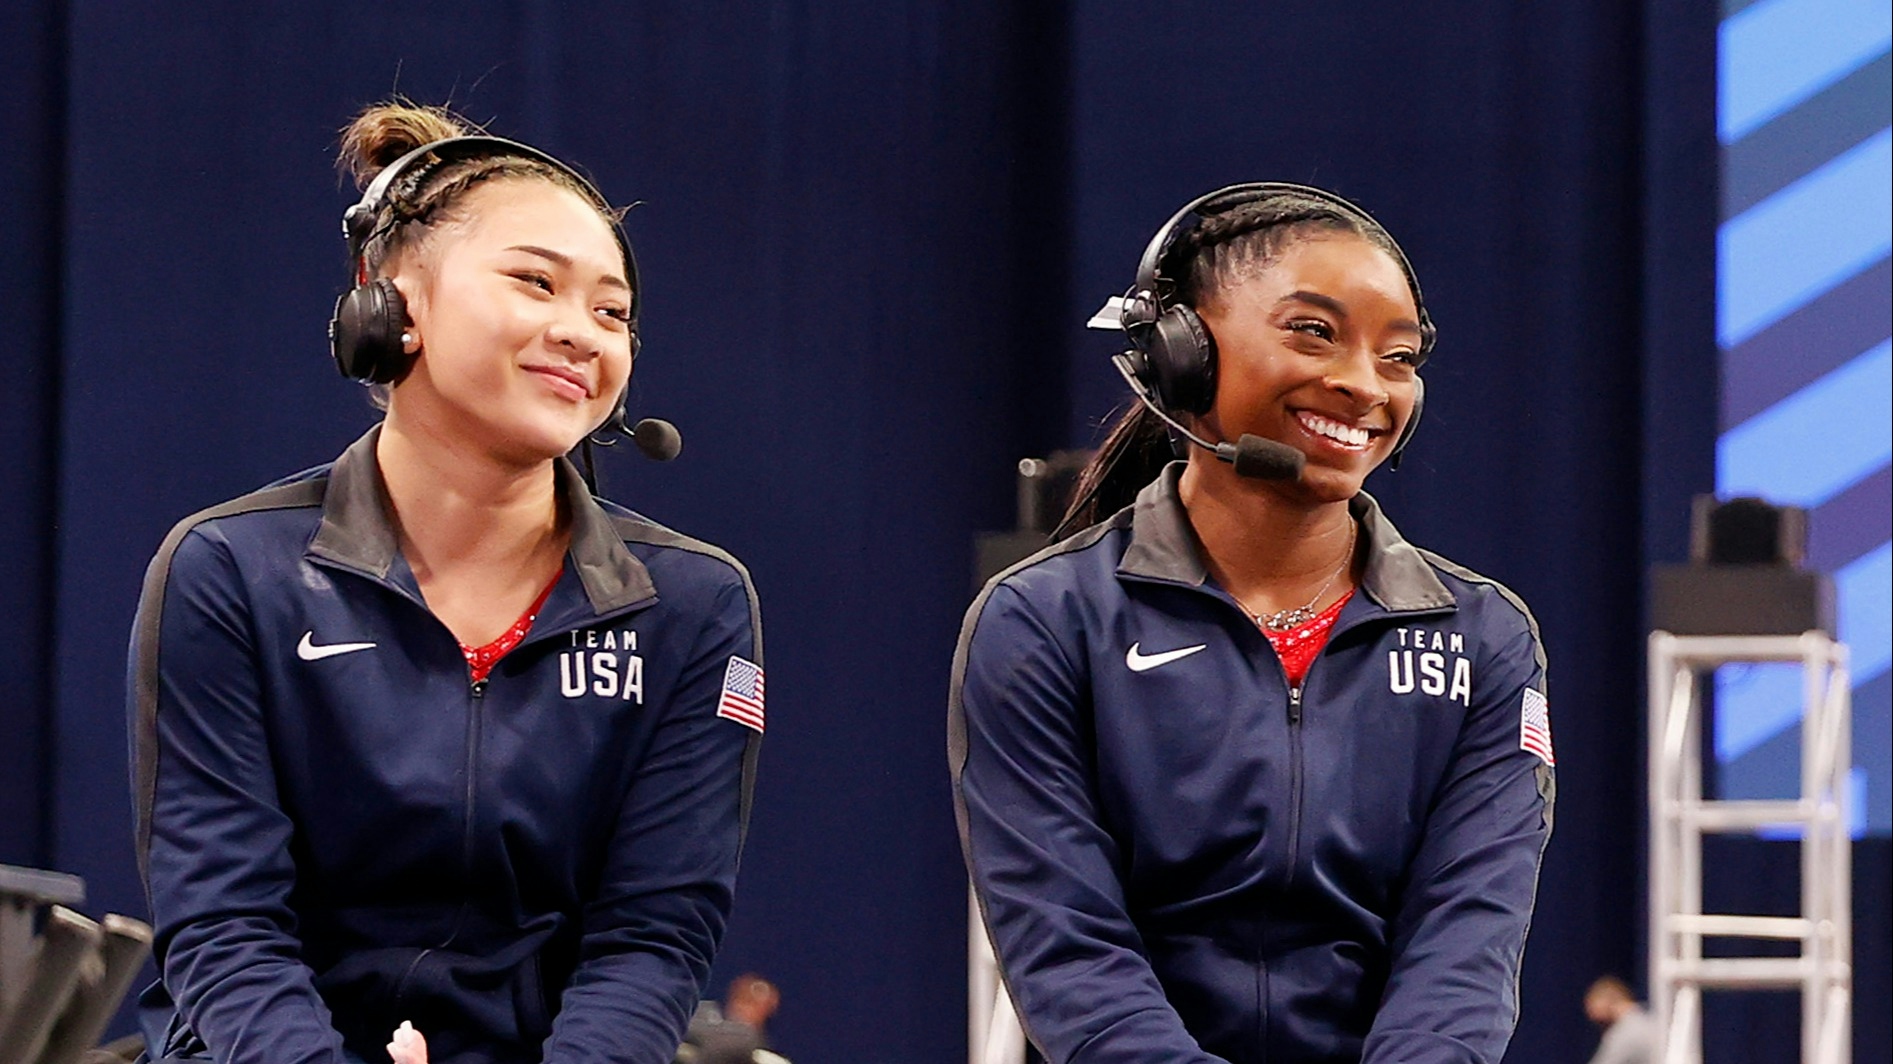 Simone Biles (L) and Sunisa Lee of the United States react during the women's artistic gymnastics team all-around final